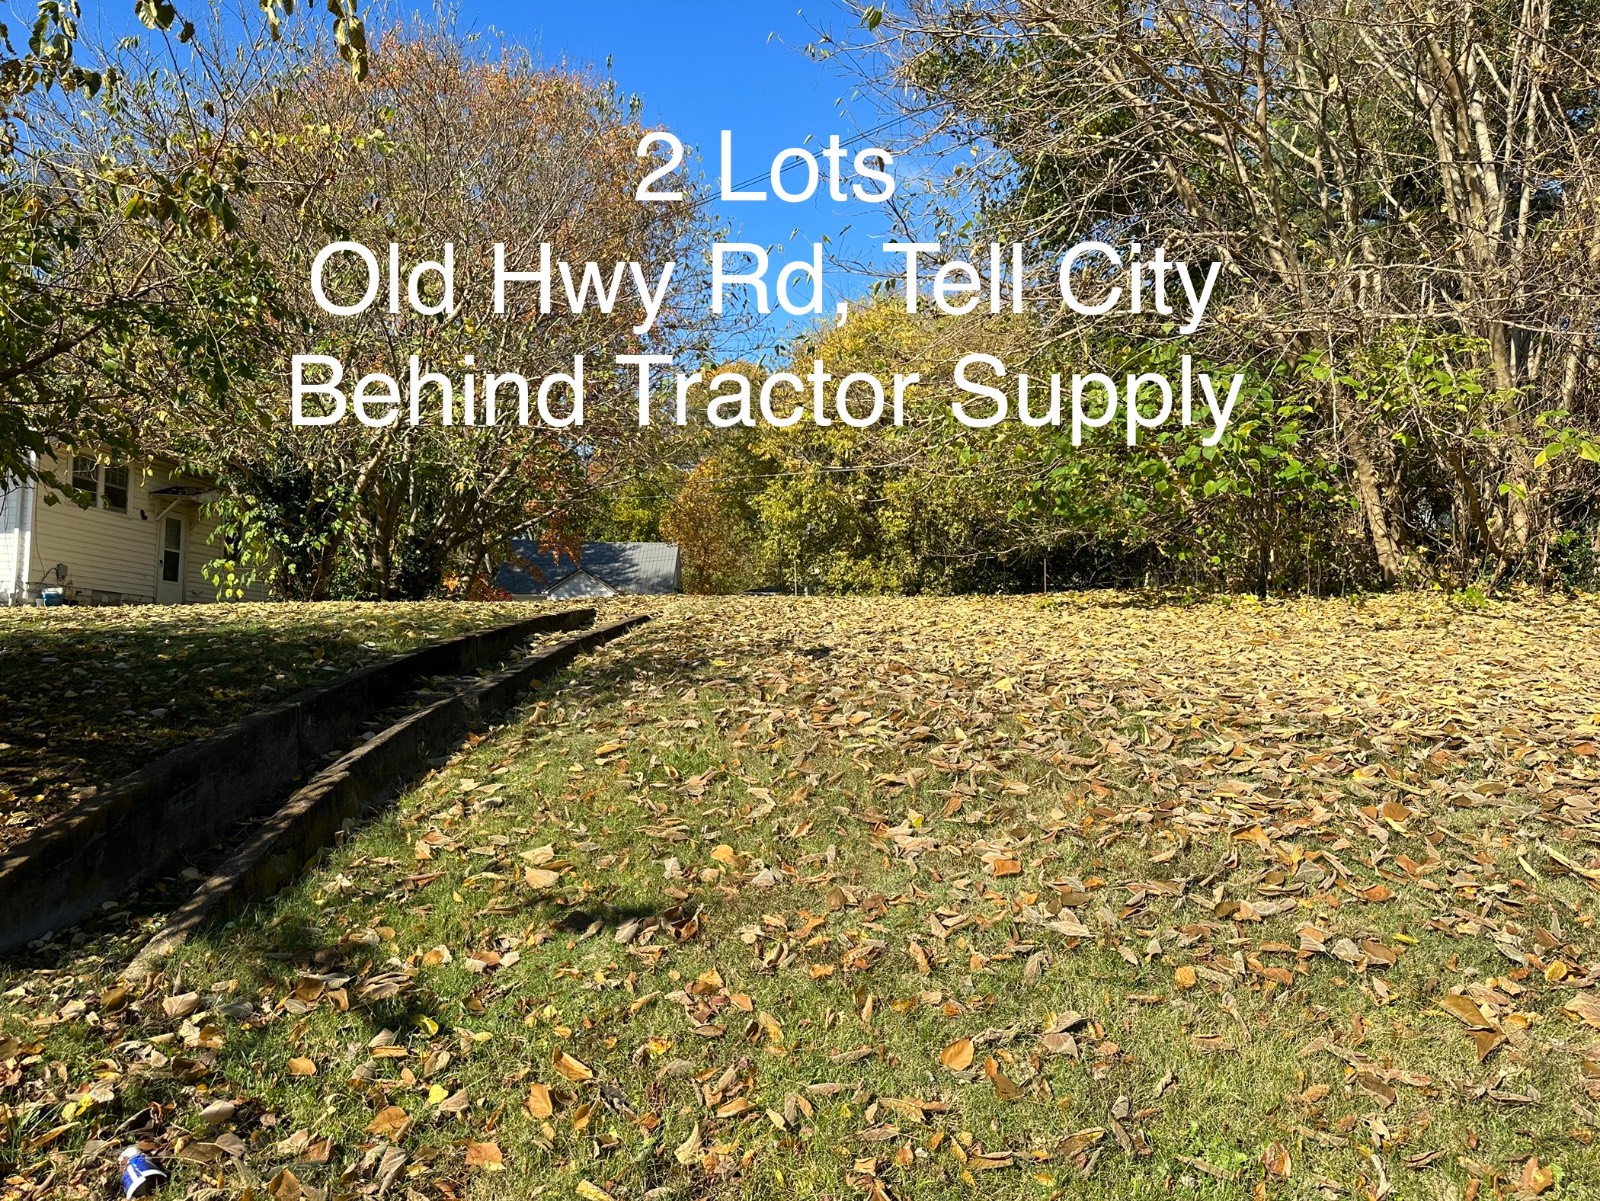 2 Large Lots Near Tractor Supply